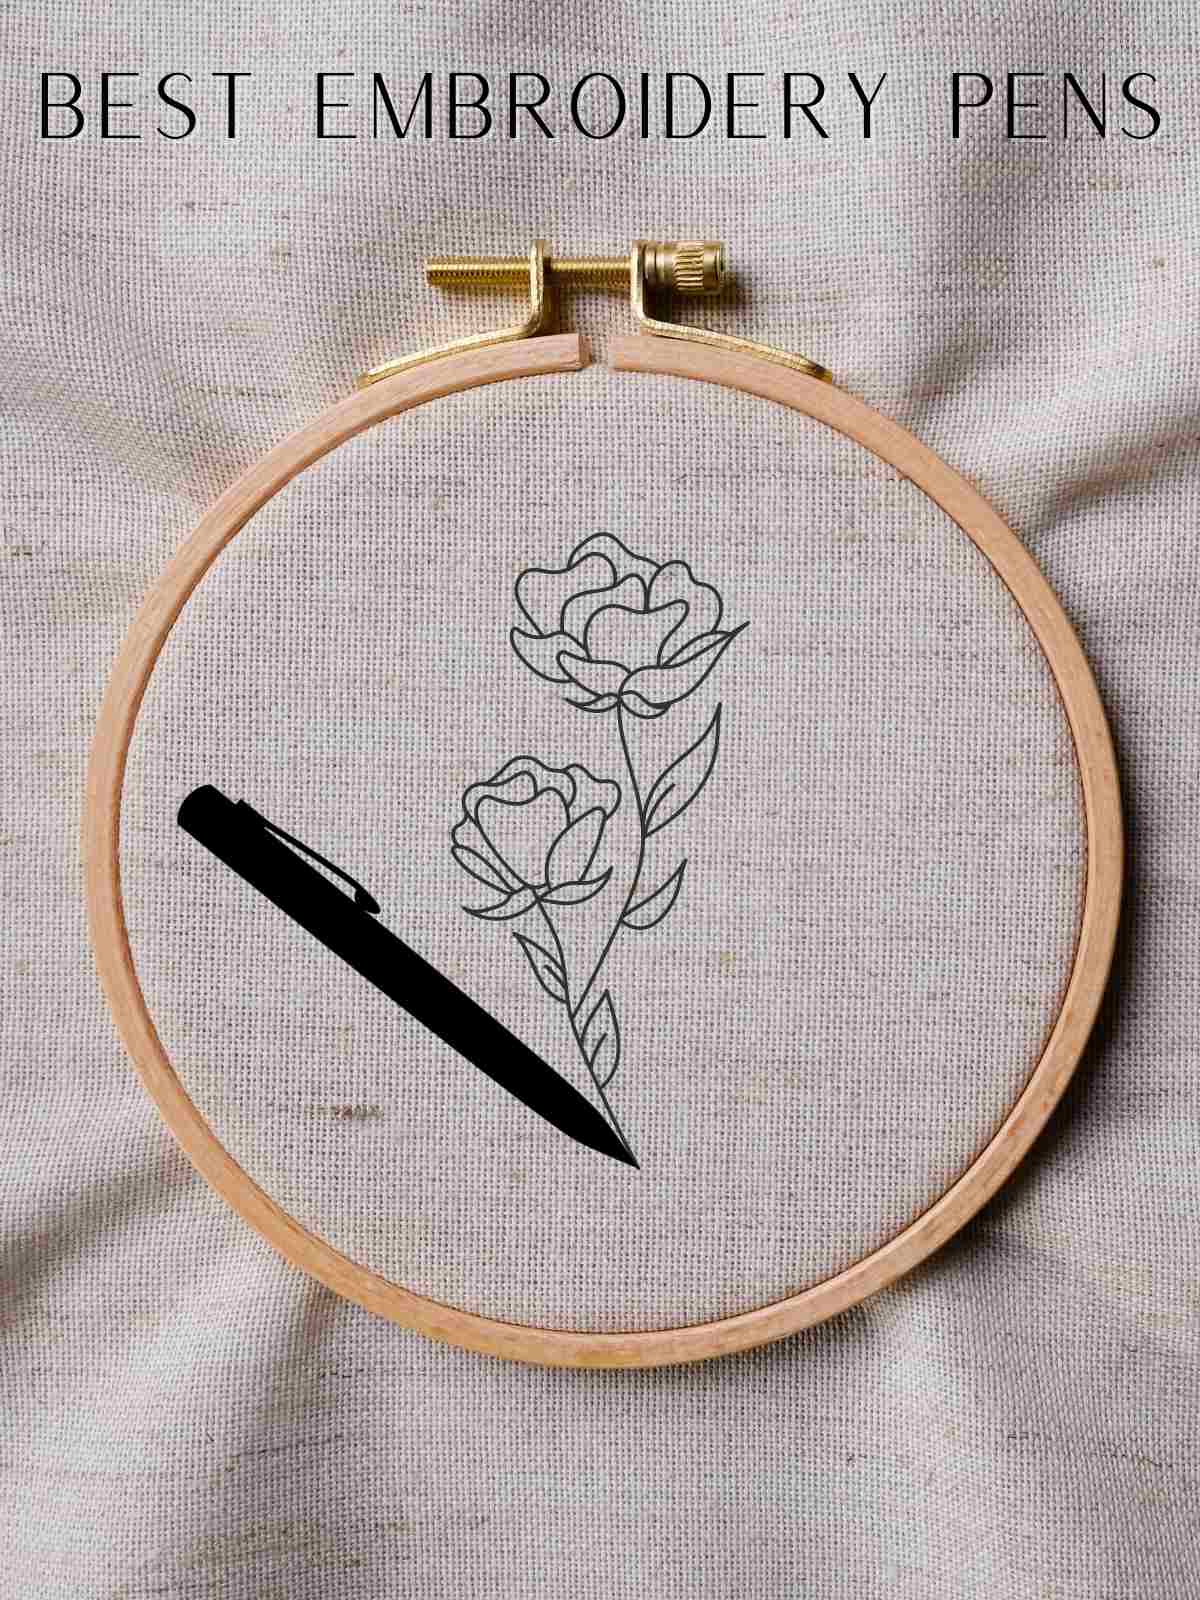 5 best Embroidery Transfer Pens and How They Work 